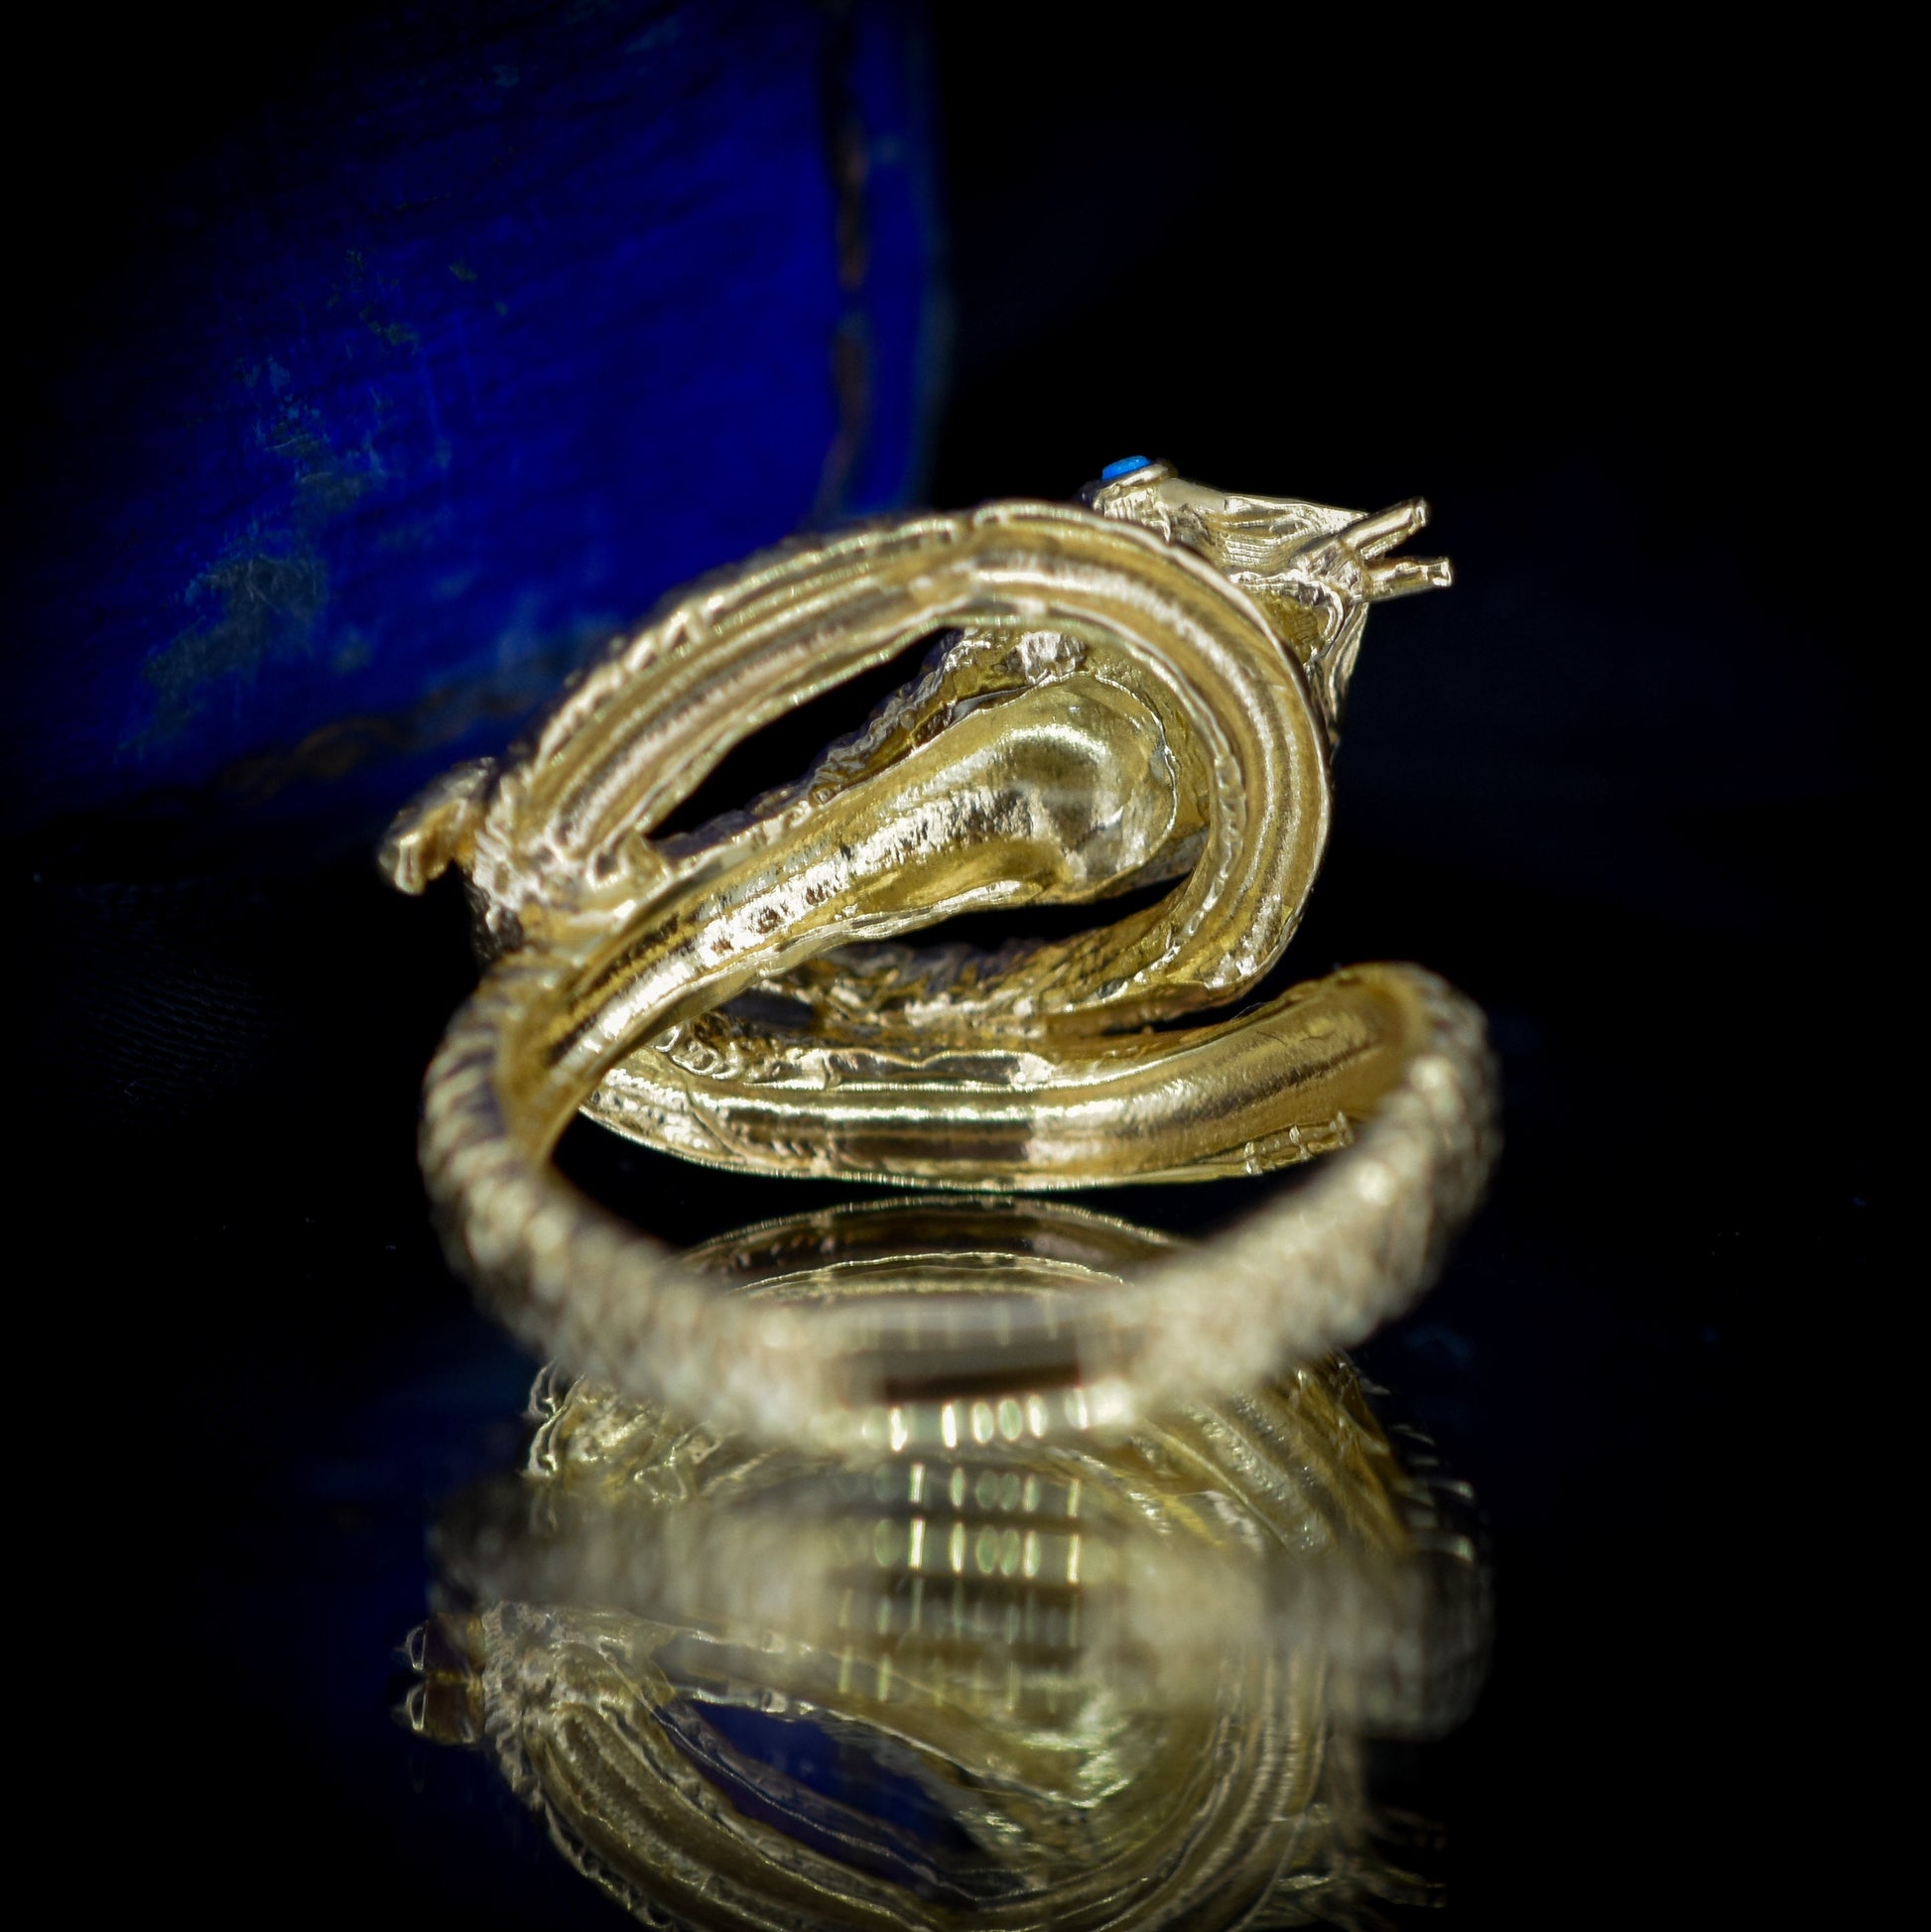 Turquoise Coiled Snake Serpent 18ct 18K Yellow Gold on Silver Ring | Antique Victorian Style